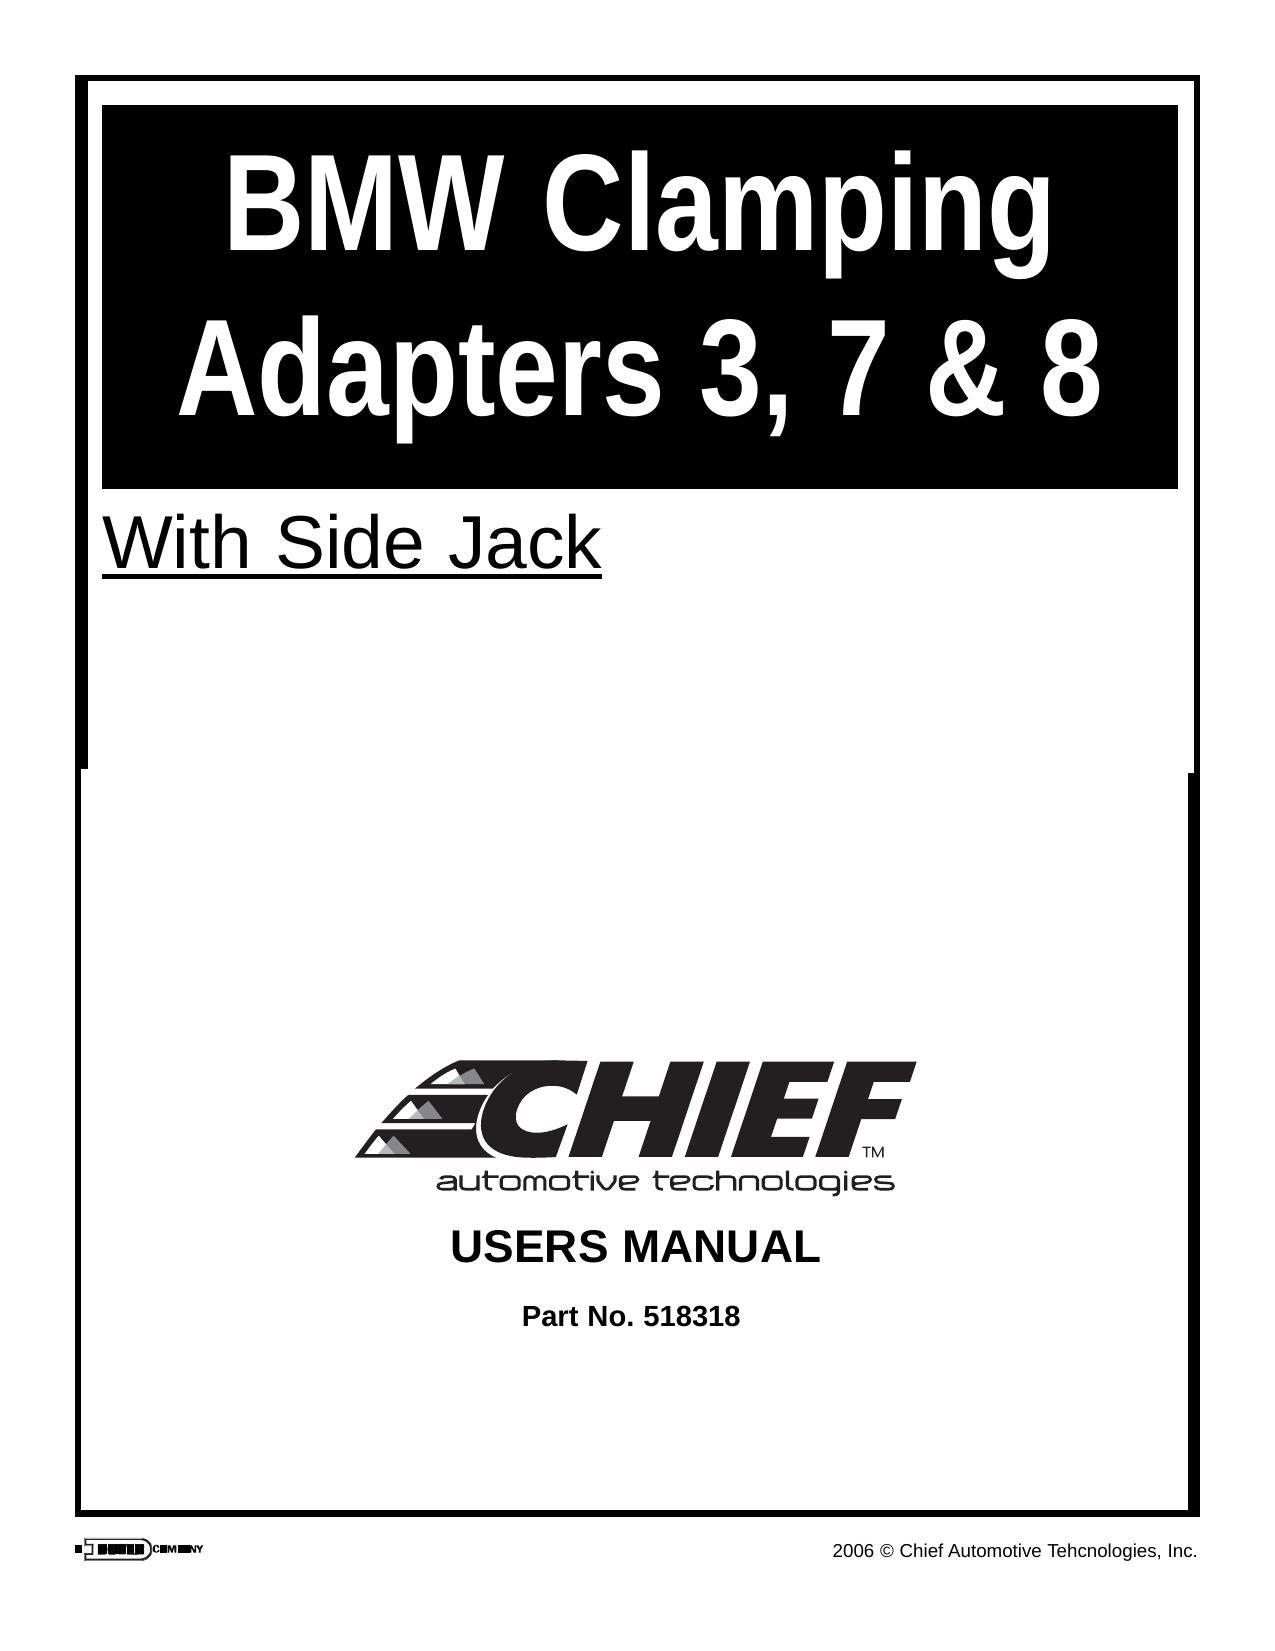 chief-automotive-technologies-users-manual-part-no-518318-for-2006-bmw-3-7-and-8-series.pdf